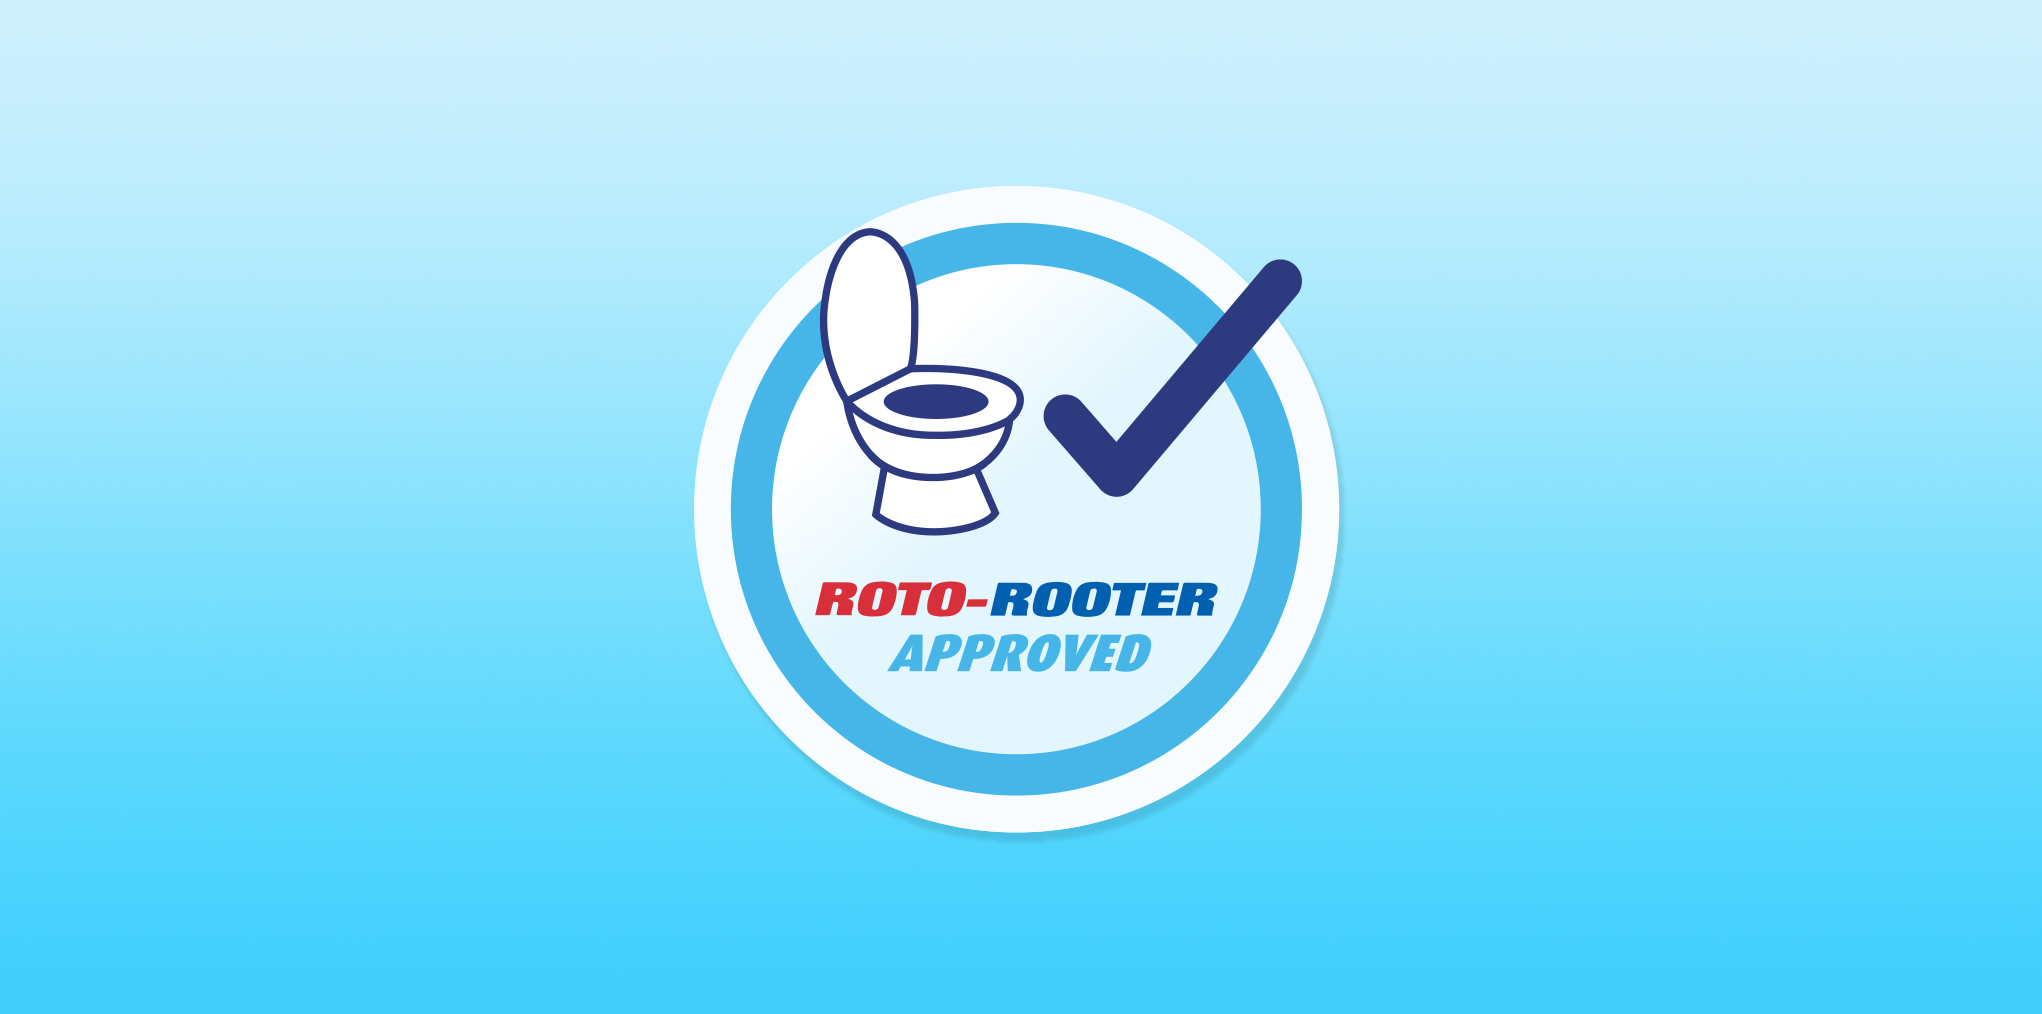 Charmin toilet paper got a seal of approval from roto rooter plumbers